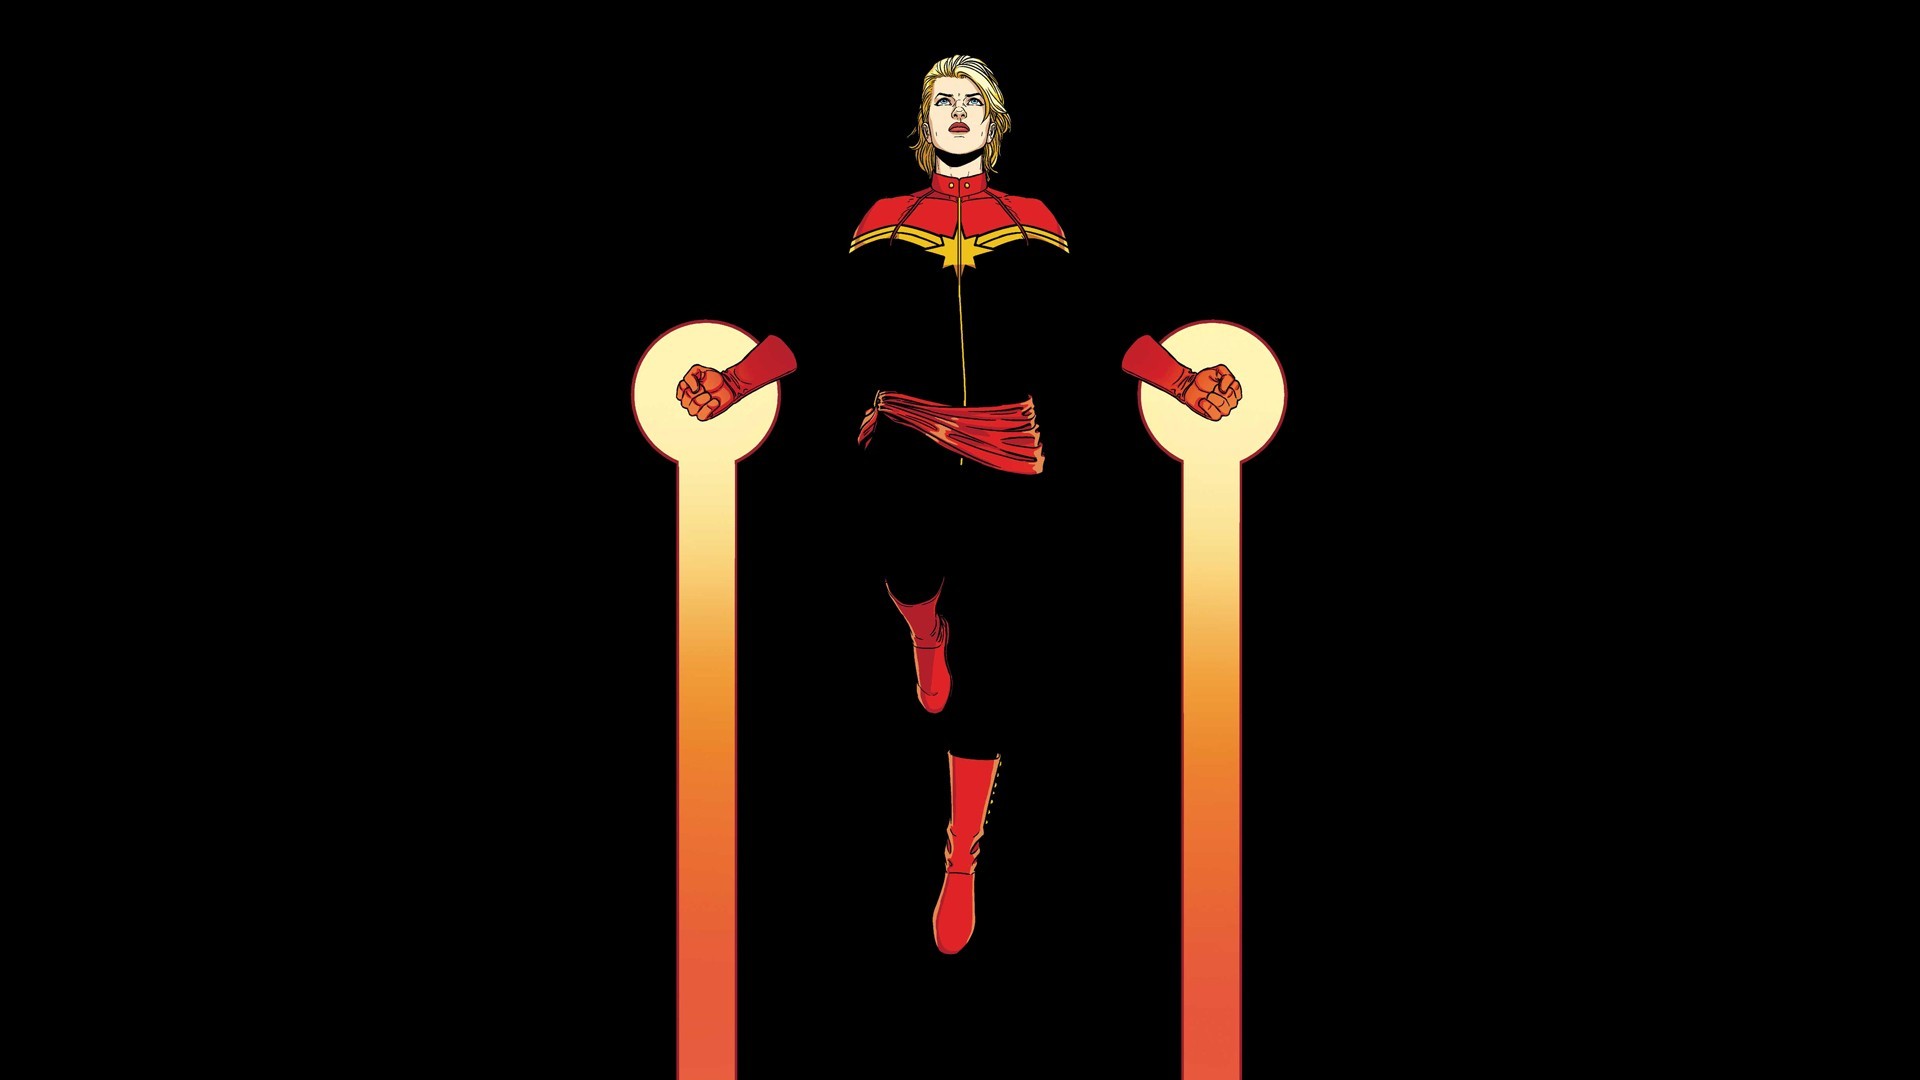 1920x1080 60 Captain Marvel HD Wallpapers | Backgrounds - Wallpaper Abyss - Page 2